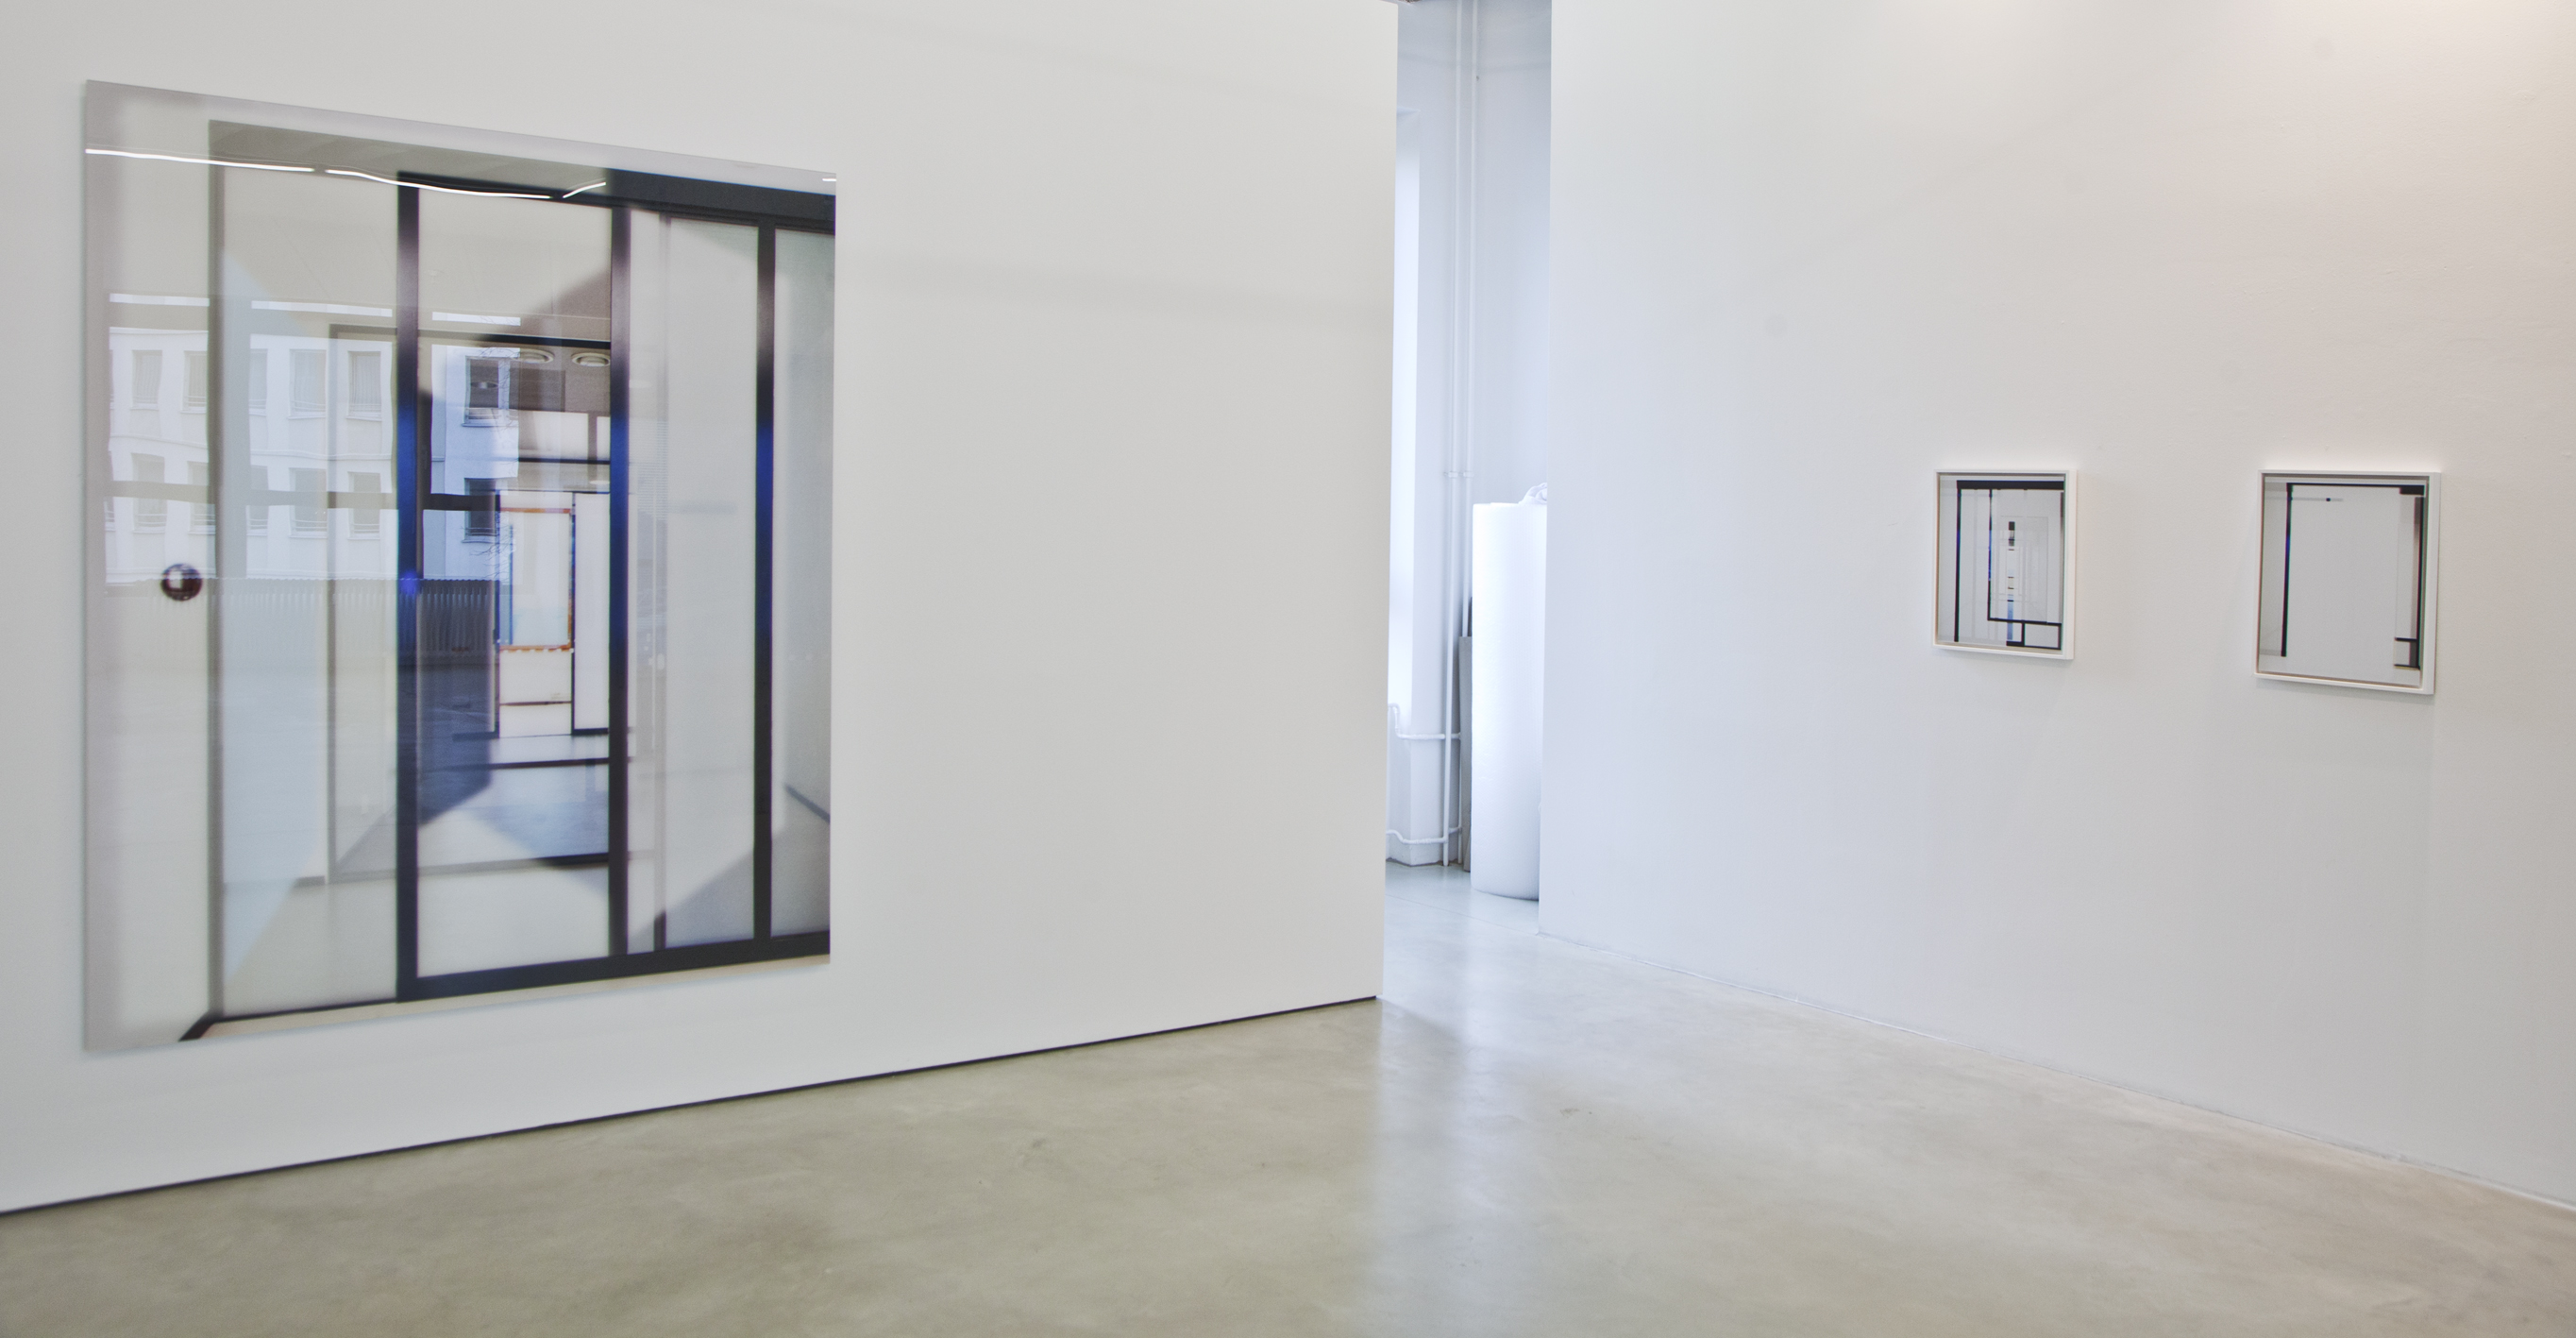 TILA/Spatial Changes, Solo Exhibtion at Gallery Taik Persons, Berlin, 2014